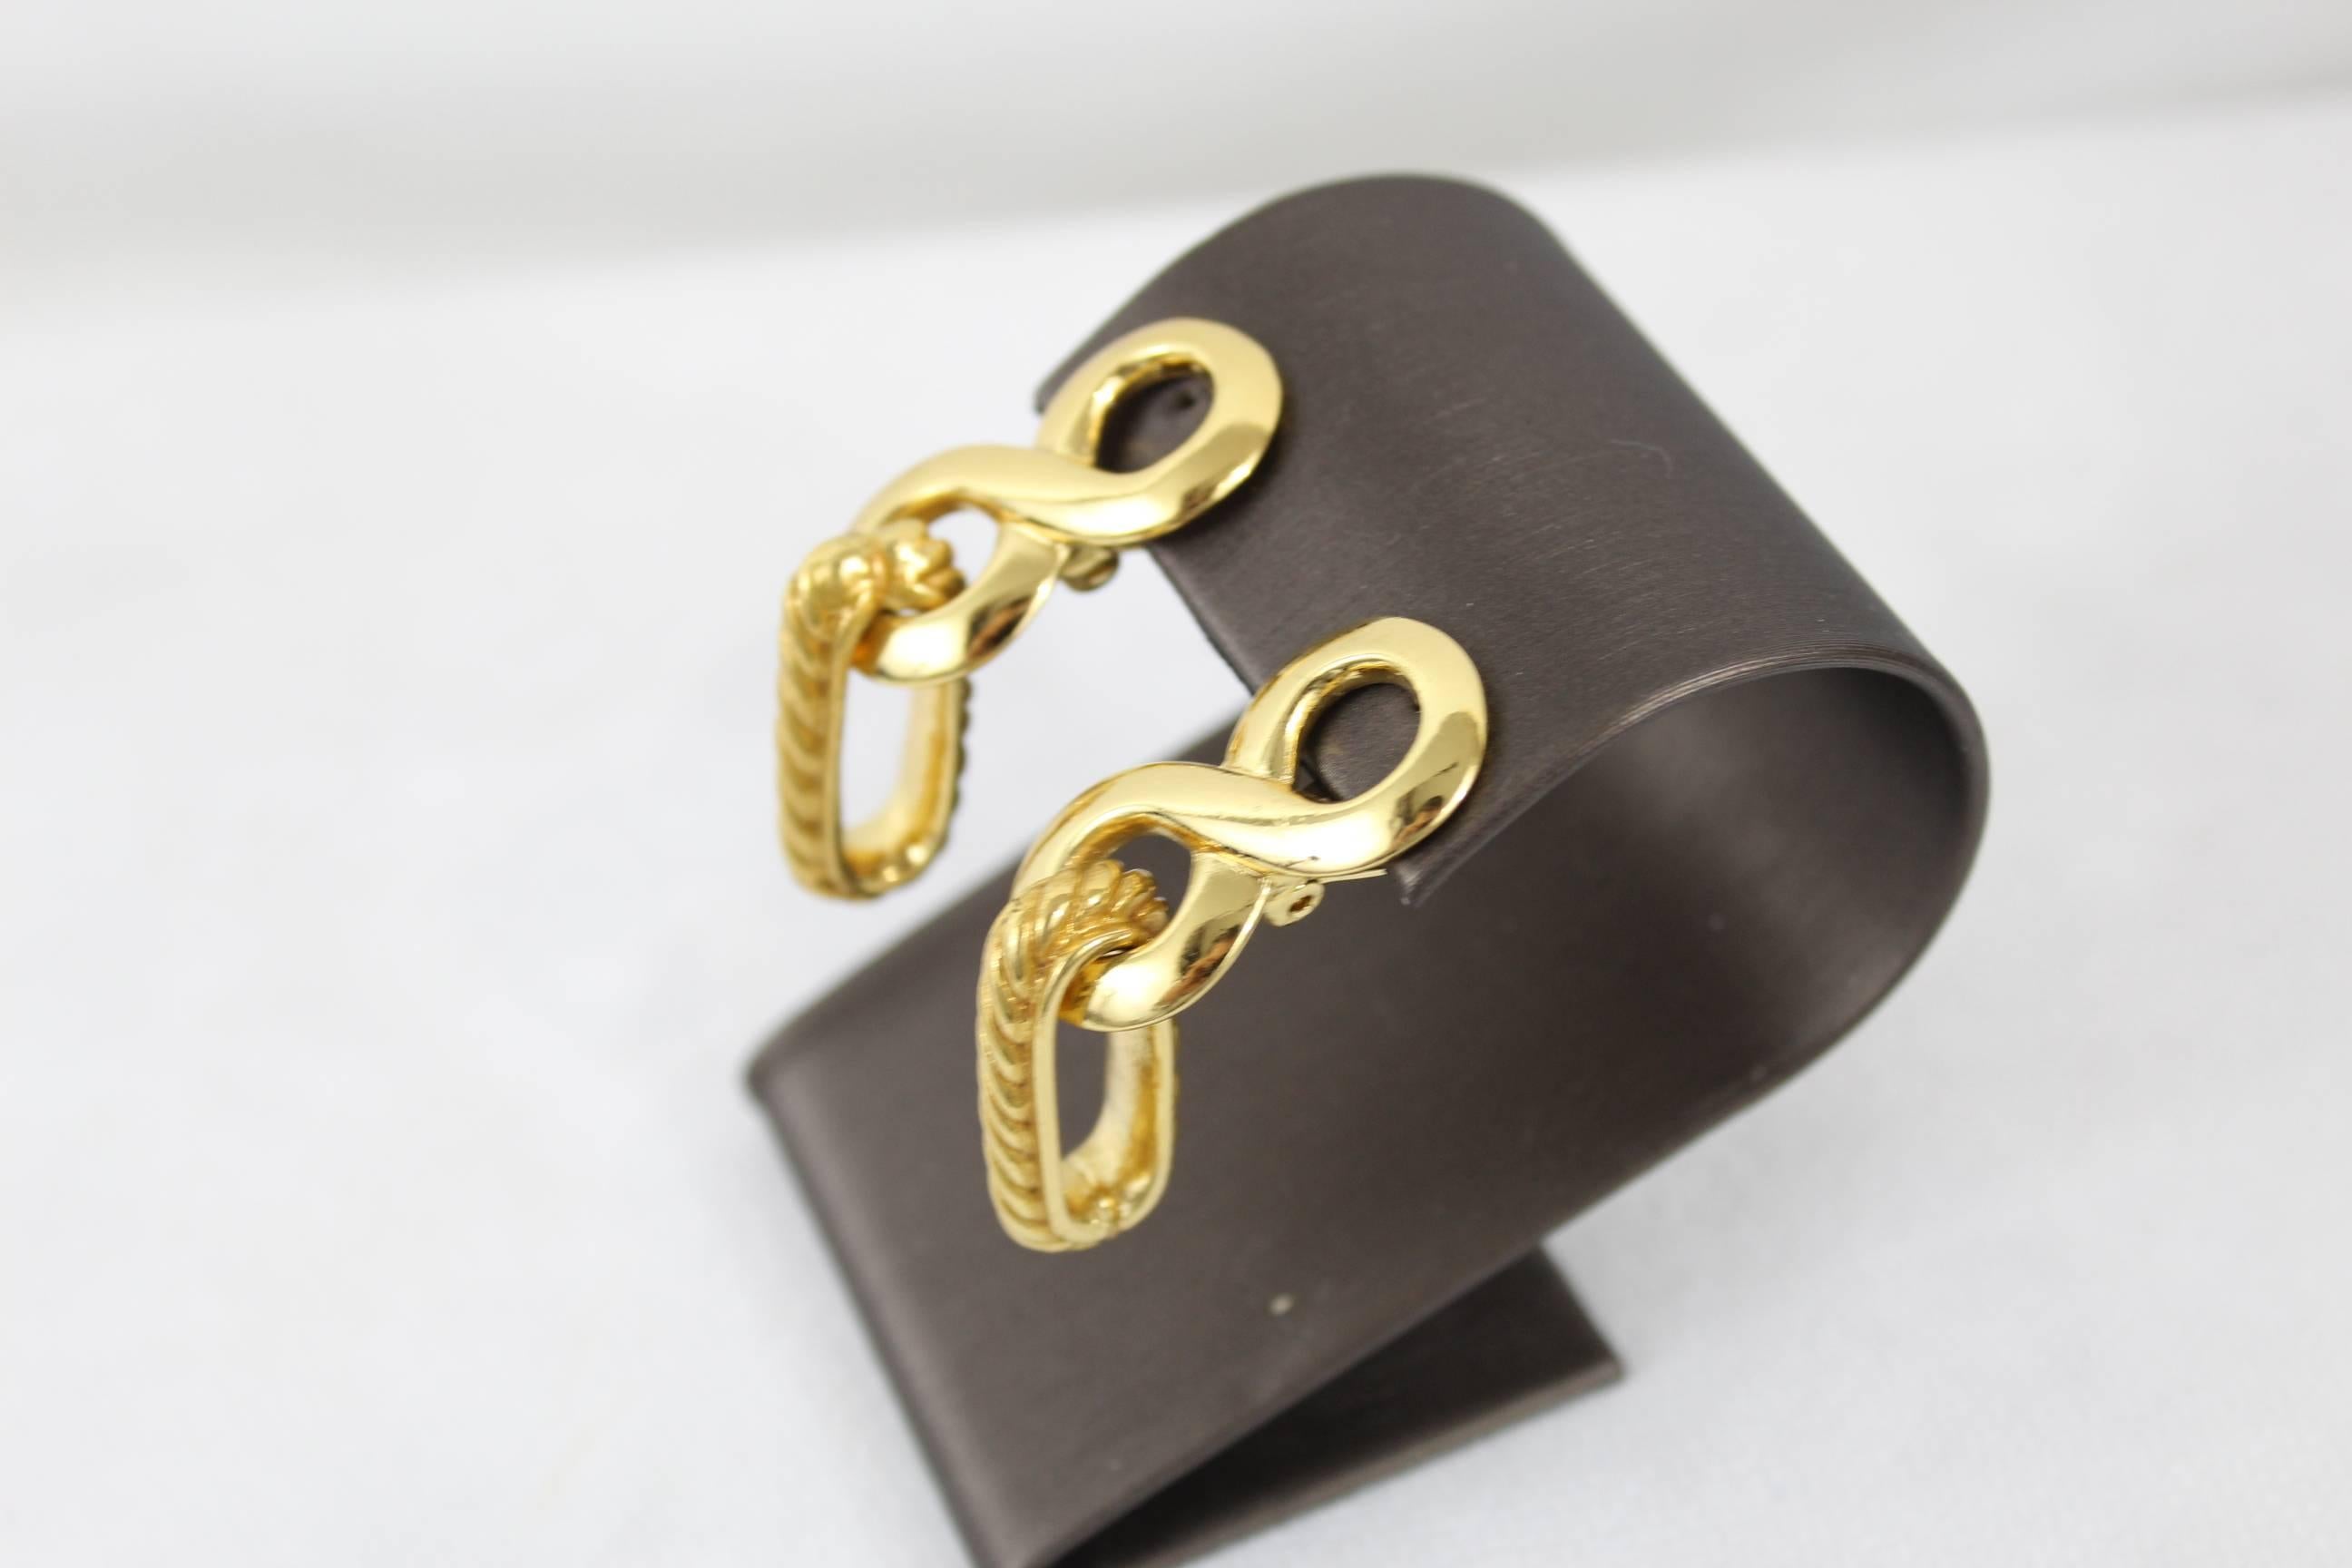 Nice pair of Yves saint Laurent Golden Earrings in really good condition

Total lenght 2